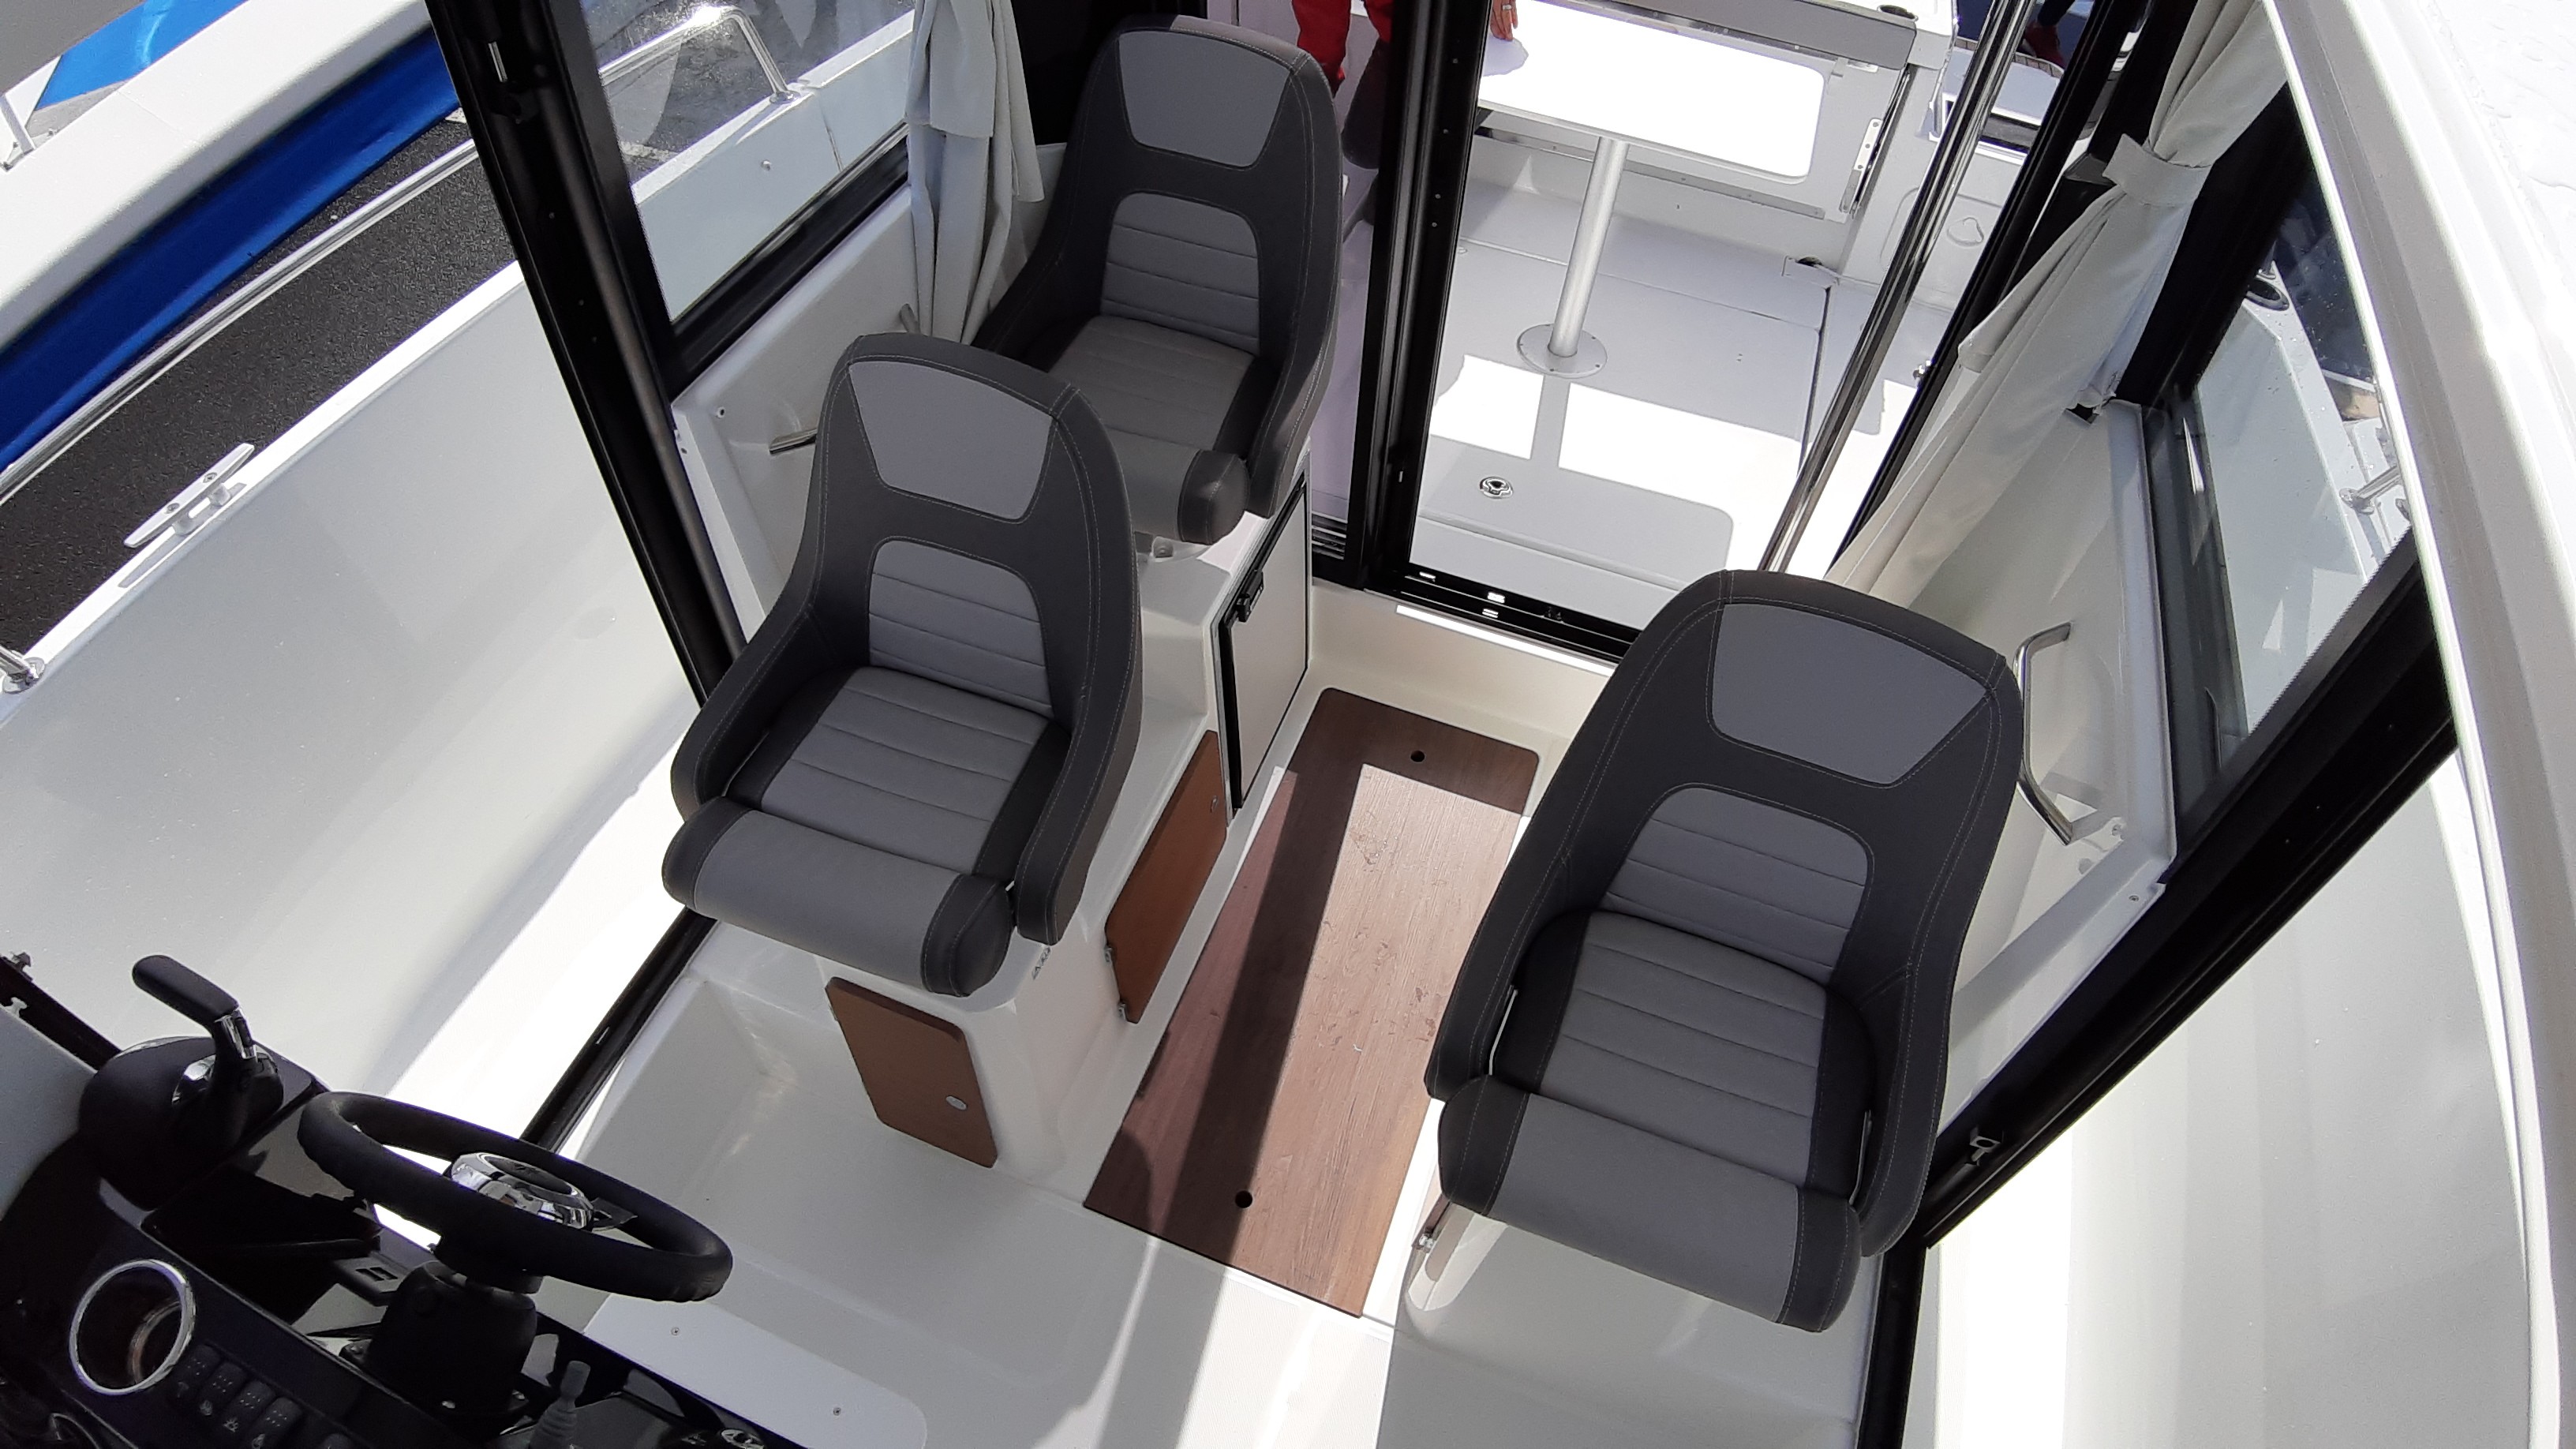 Main seats in Merry Fisher 795 Sport S2